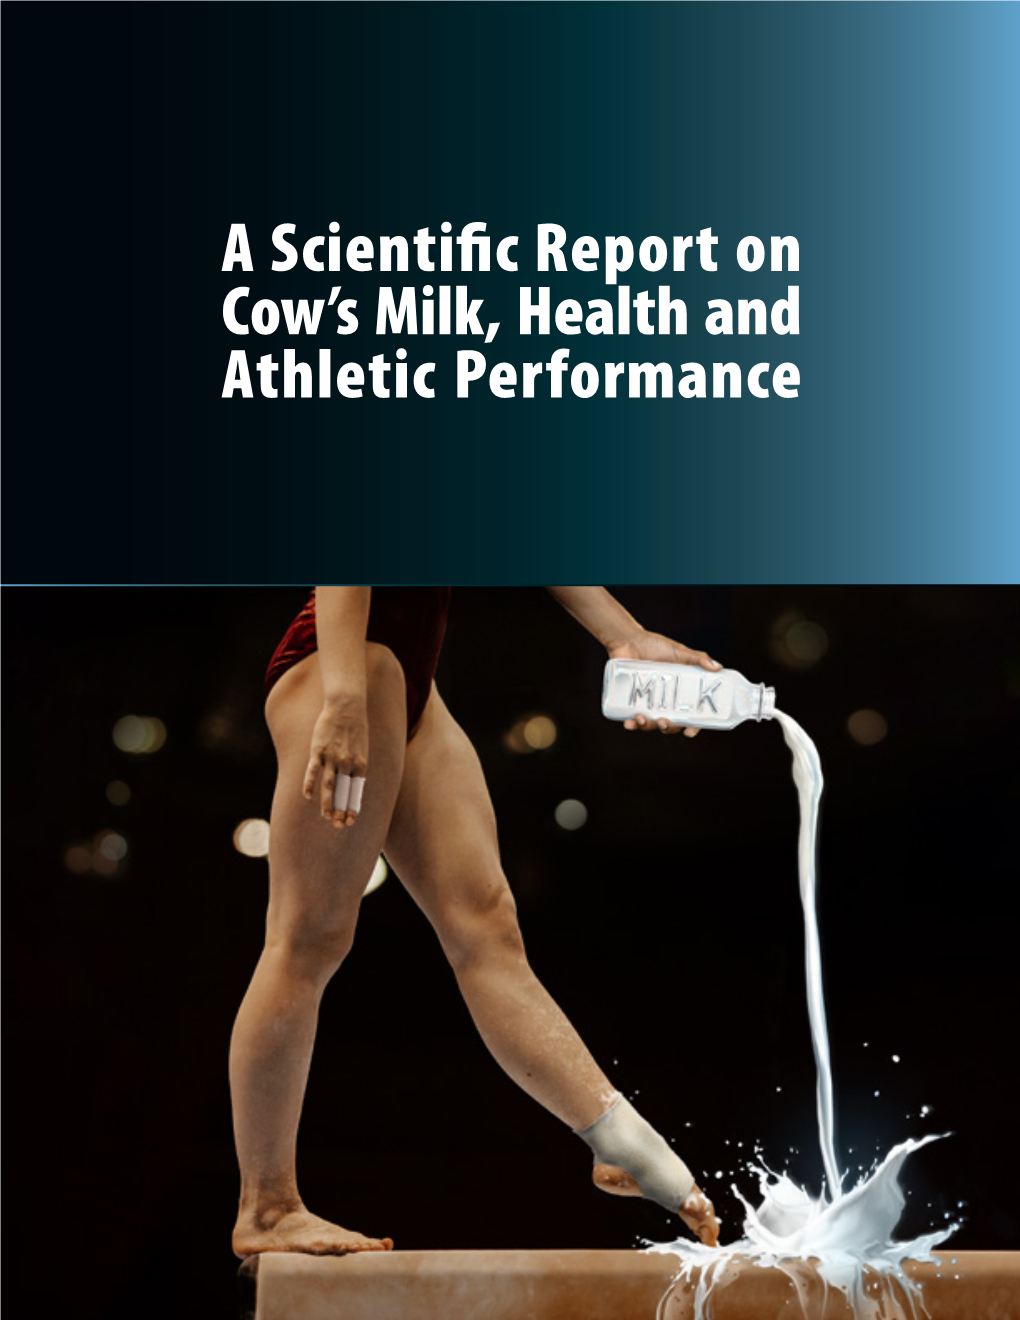 A Scientific Report on Cow's Milk, Health and Athletic Performance